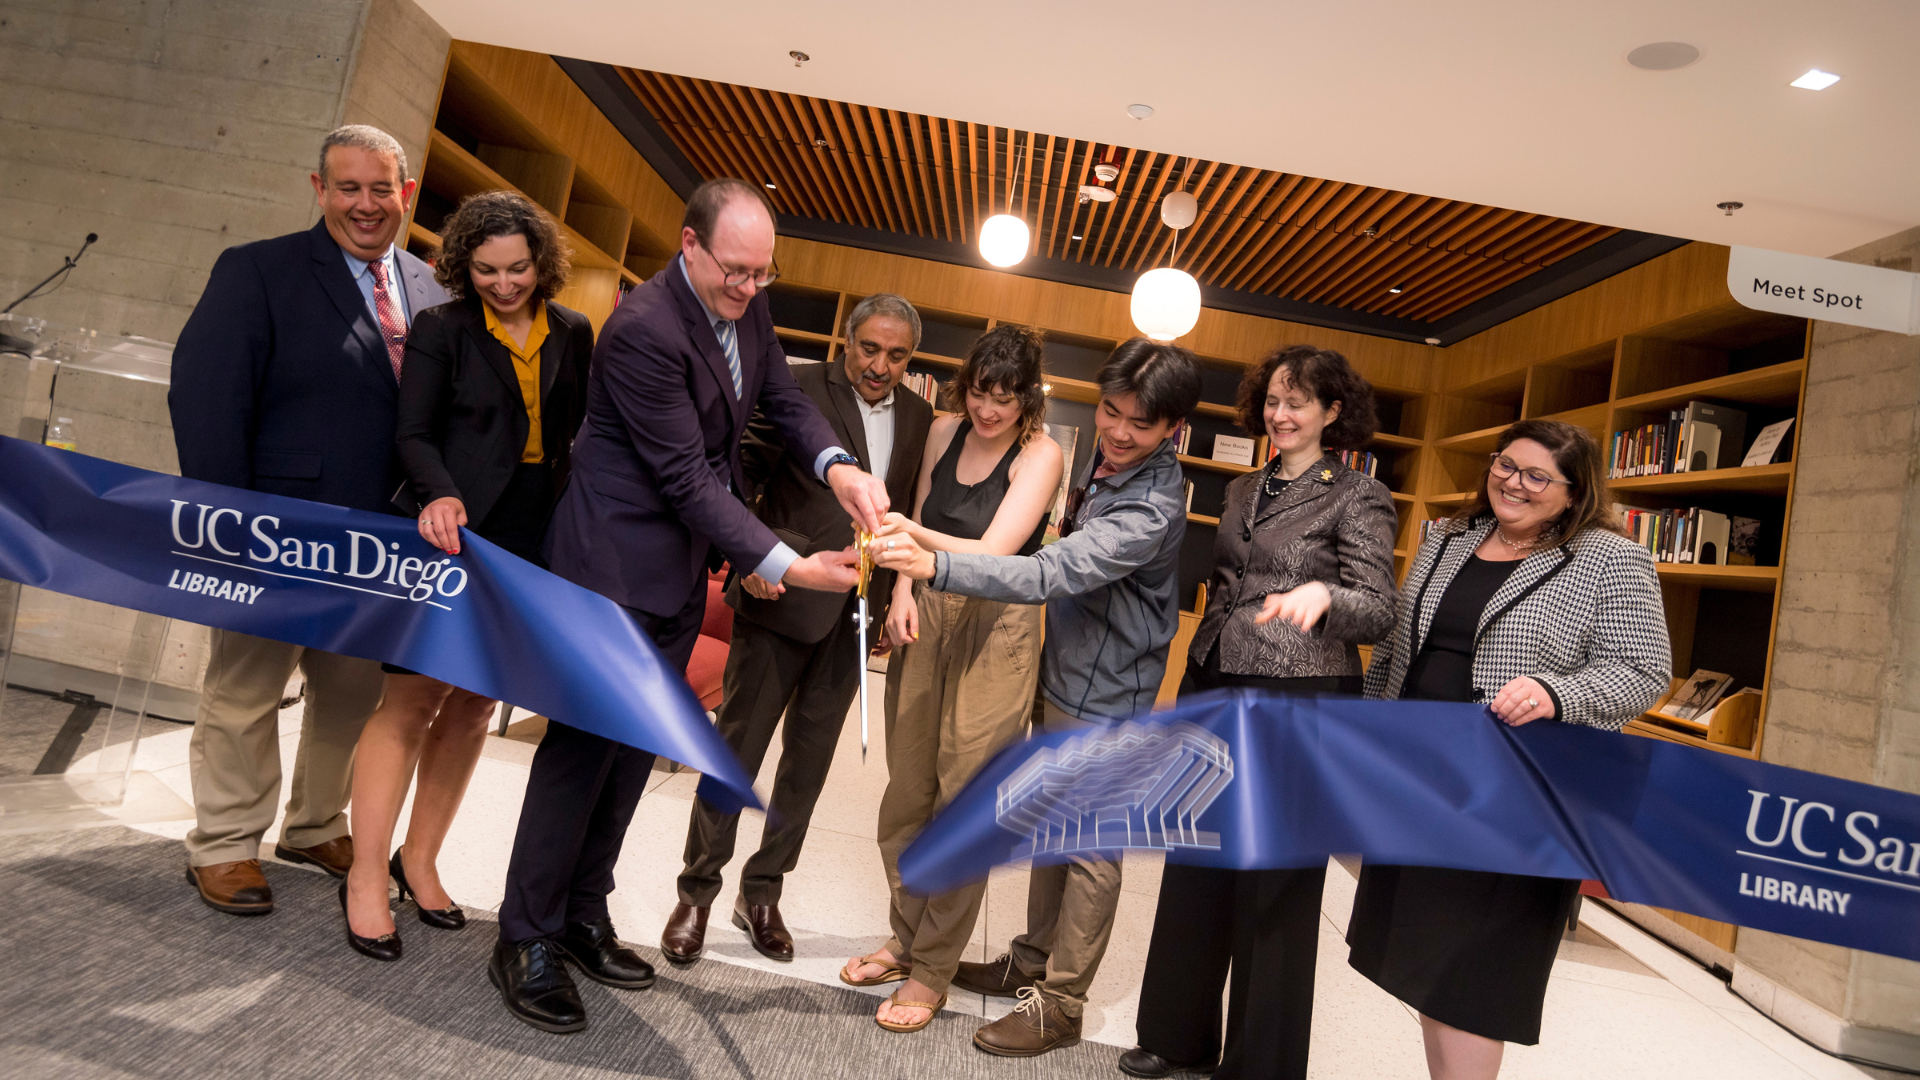 A photo of UC San Diego's leadership cutting the ribbon at the Geisel Library Renovation Reveal.